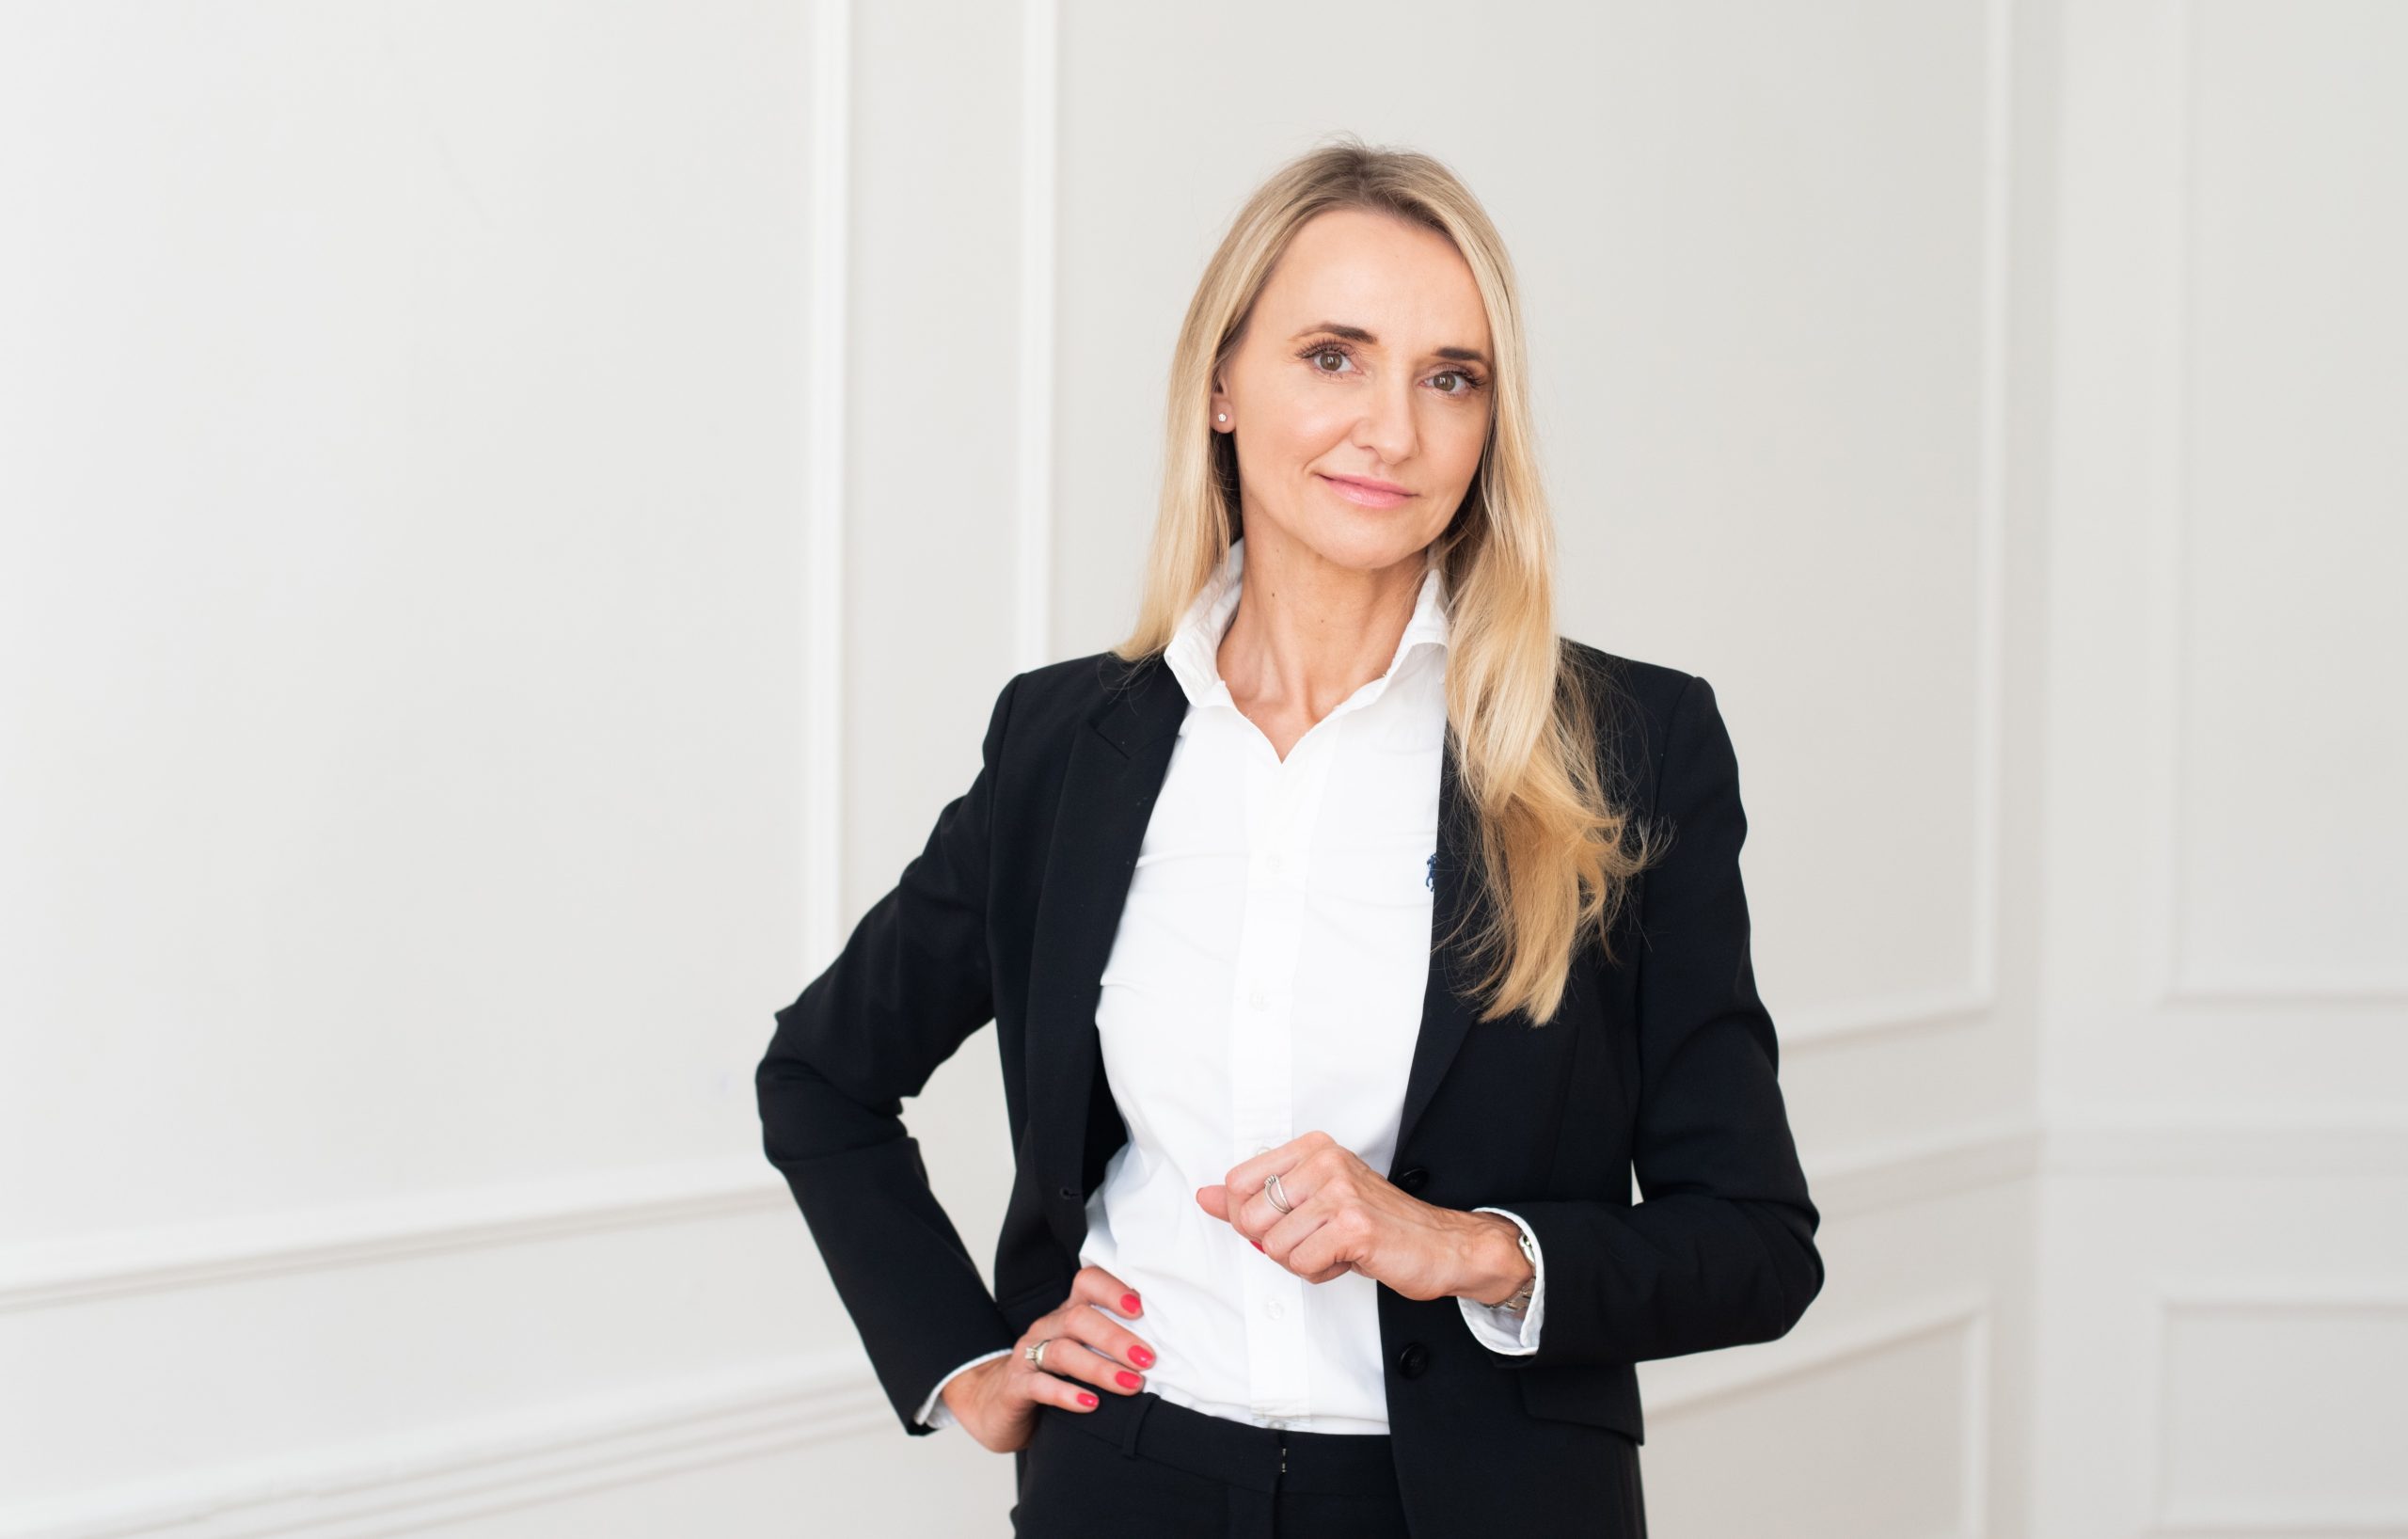 What challenges do women in business face on the road to success? Joanna MAKOWIECKA-GATZA, CEO Karmar SA and Linkcity Poland SA (Bouygues Group), President of the Council od Employers of Poland